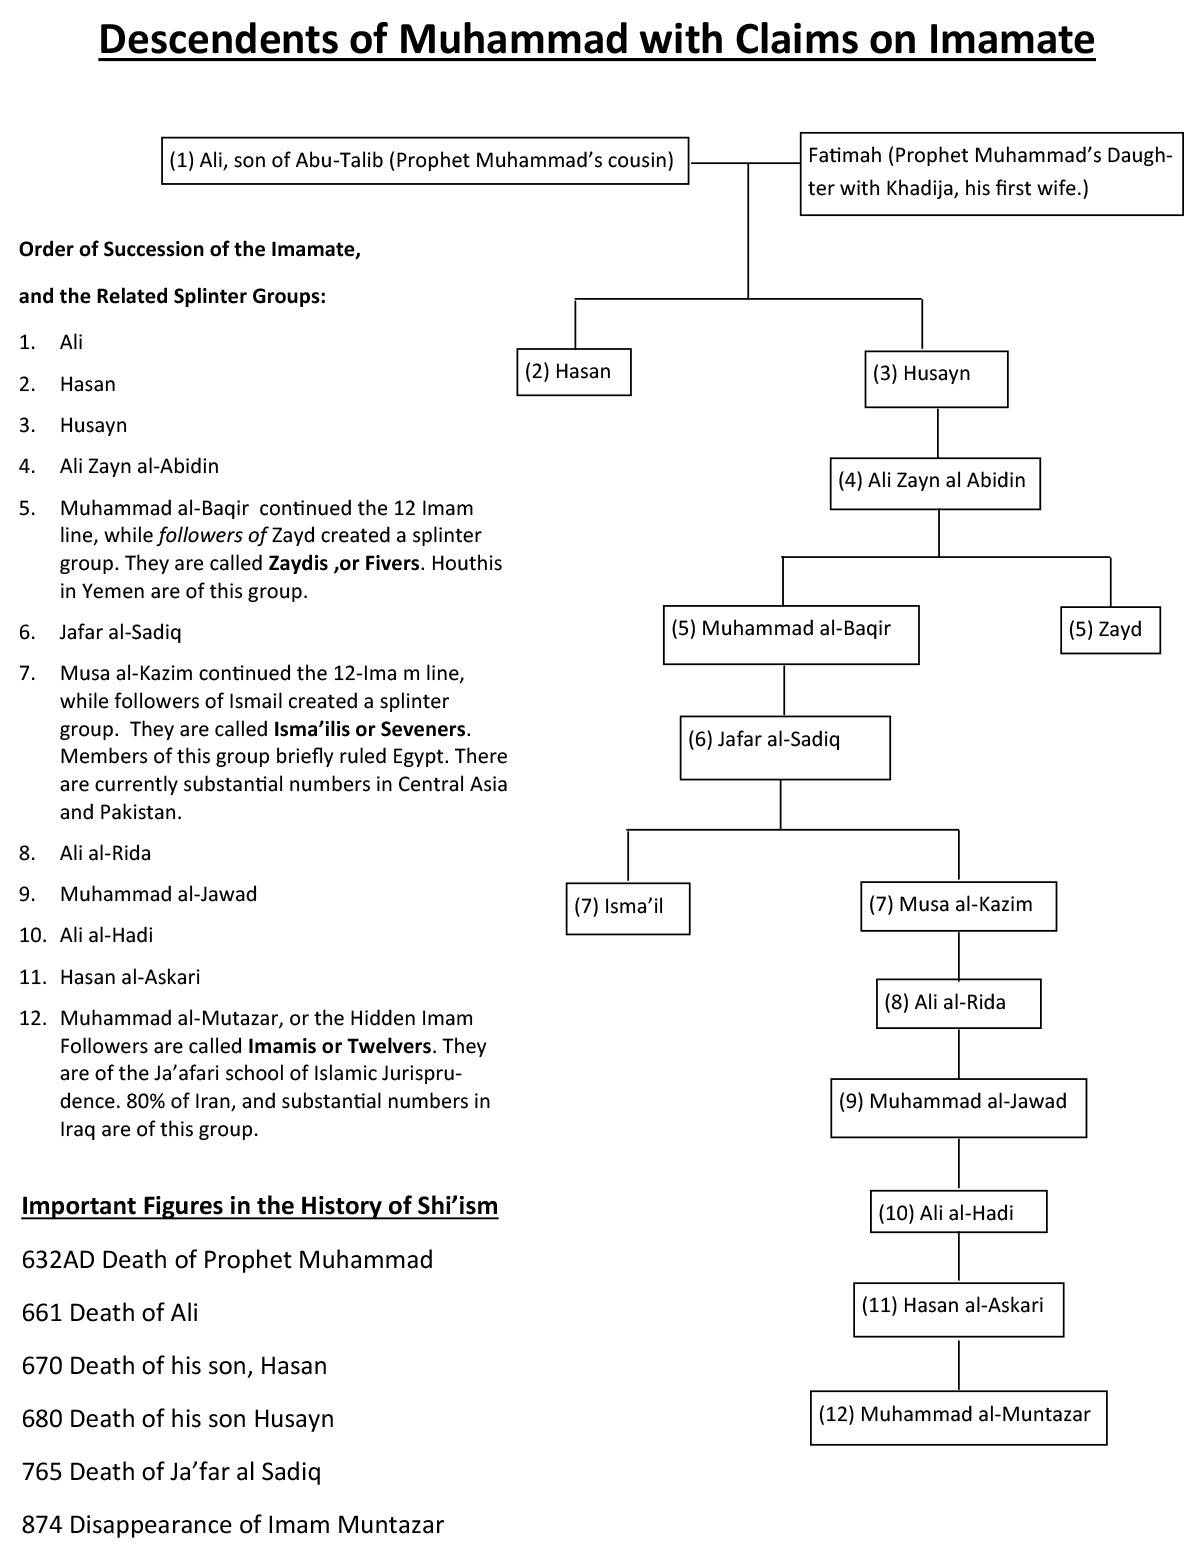 This chart shows the geneology of Shi'i Imams, or leaders of the religious community.